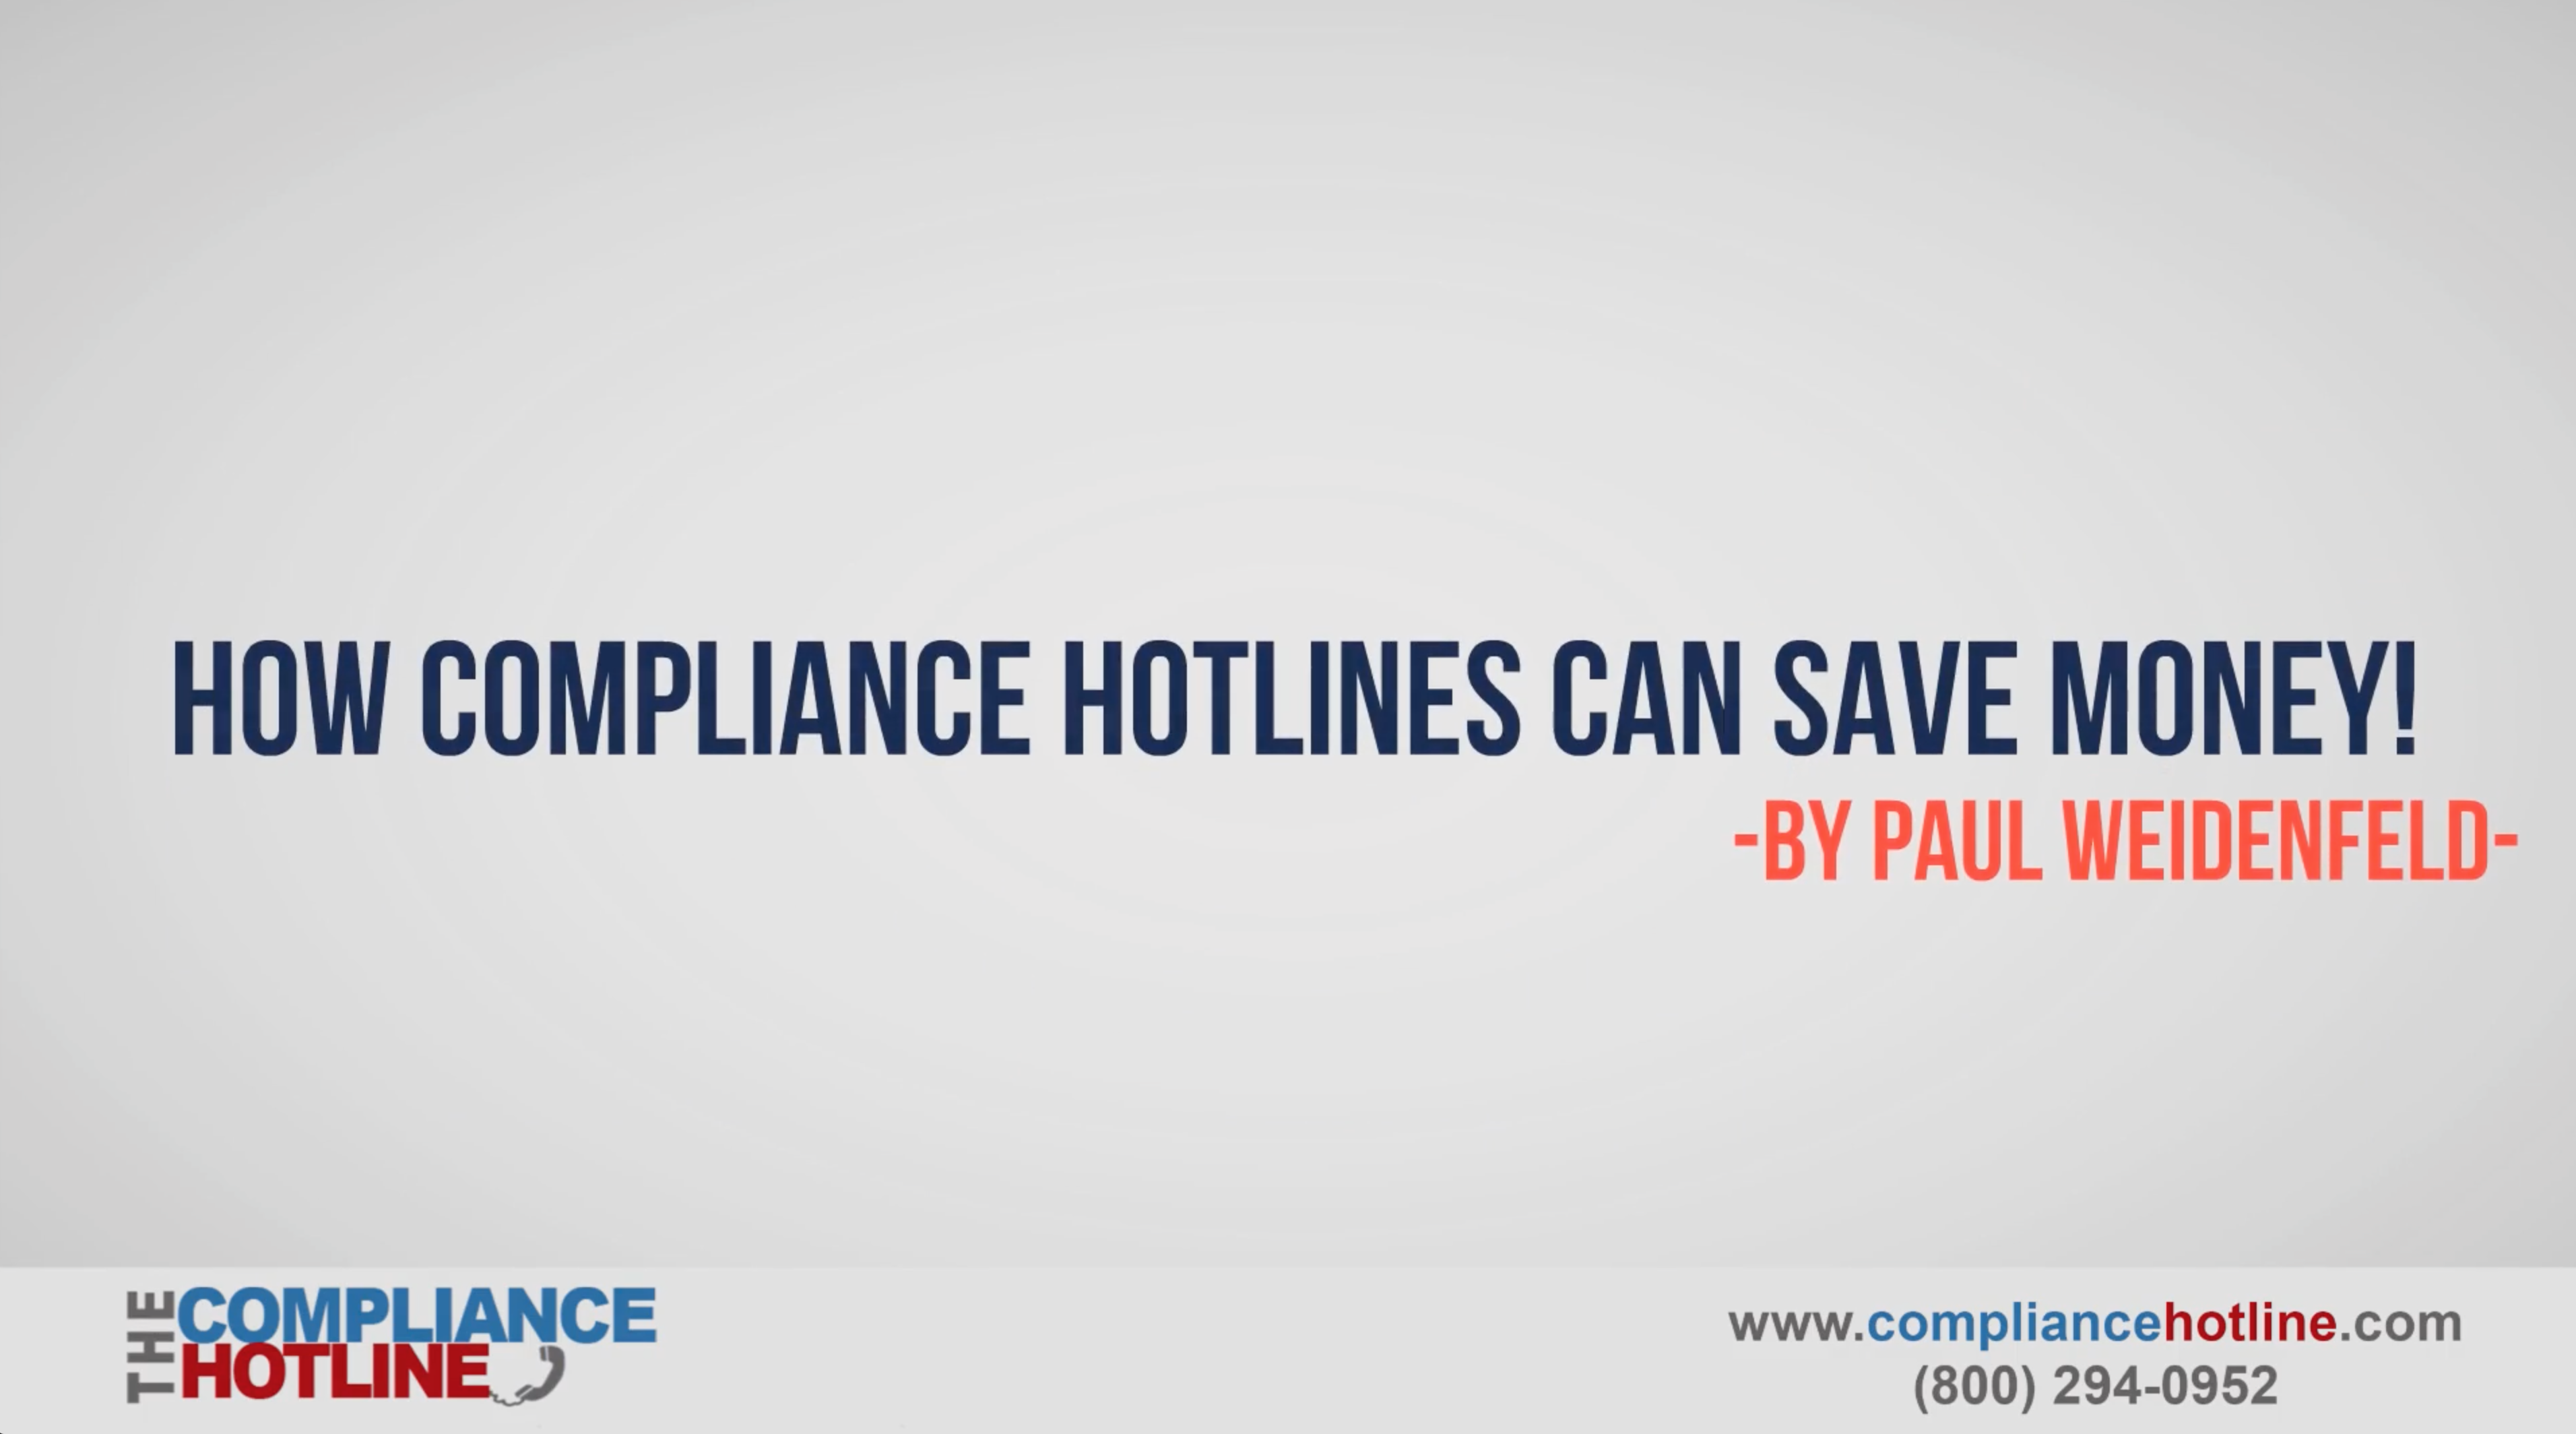 How Compliance Hotline Can Save Money!